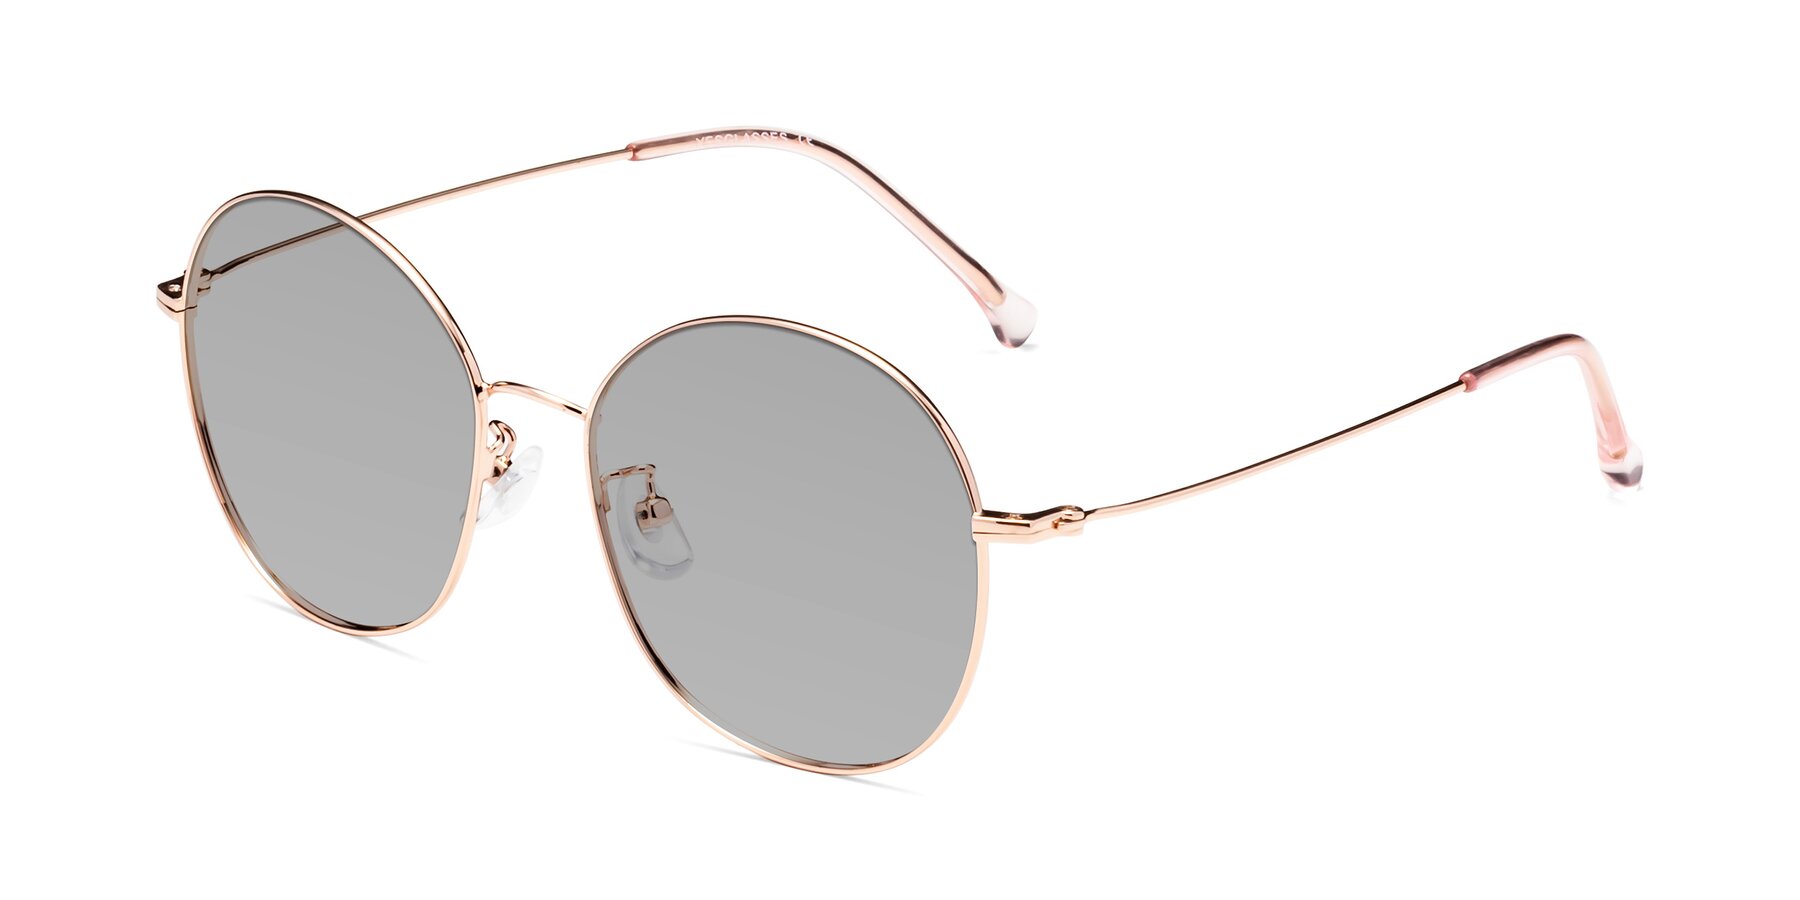 Angle of Dallas in Rose Gold with Light Gray Tinted Lenses